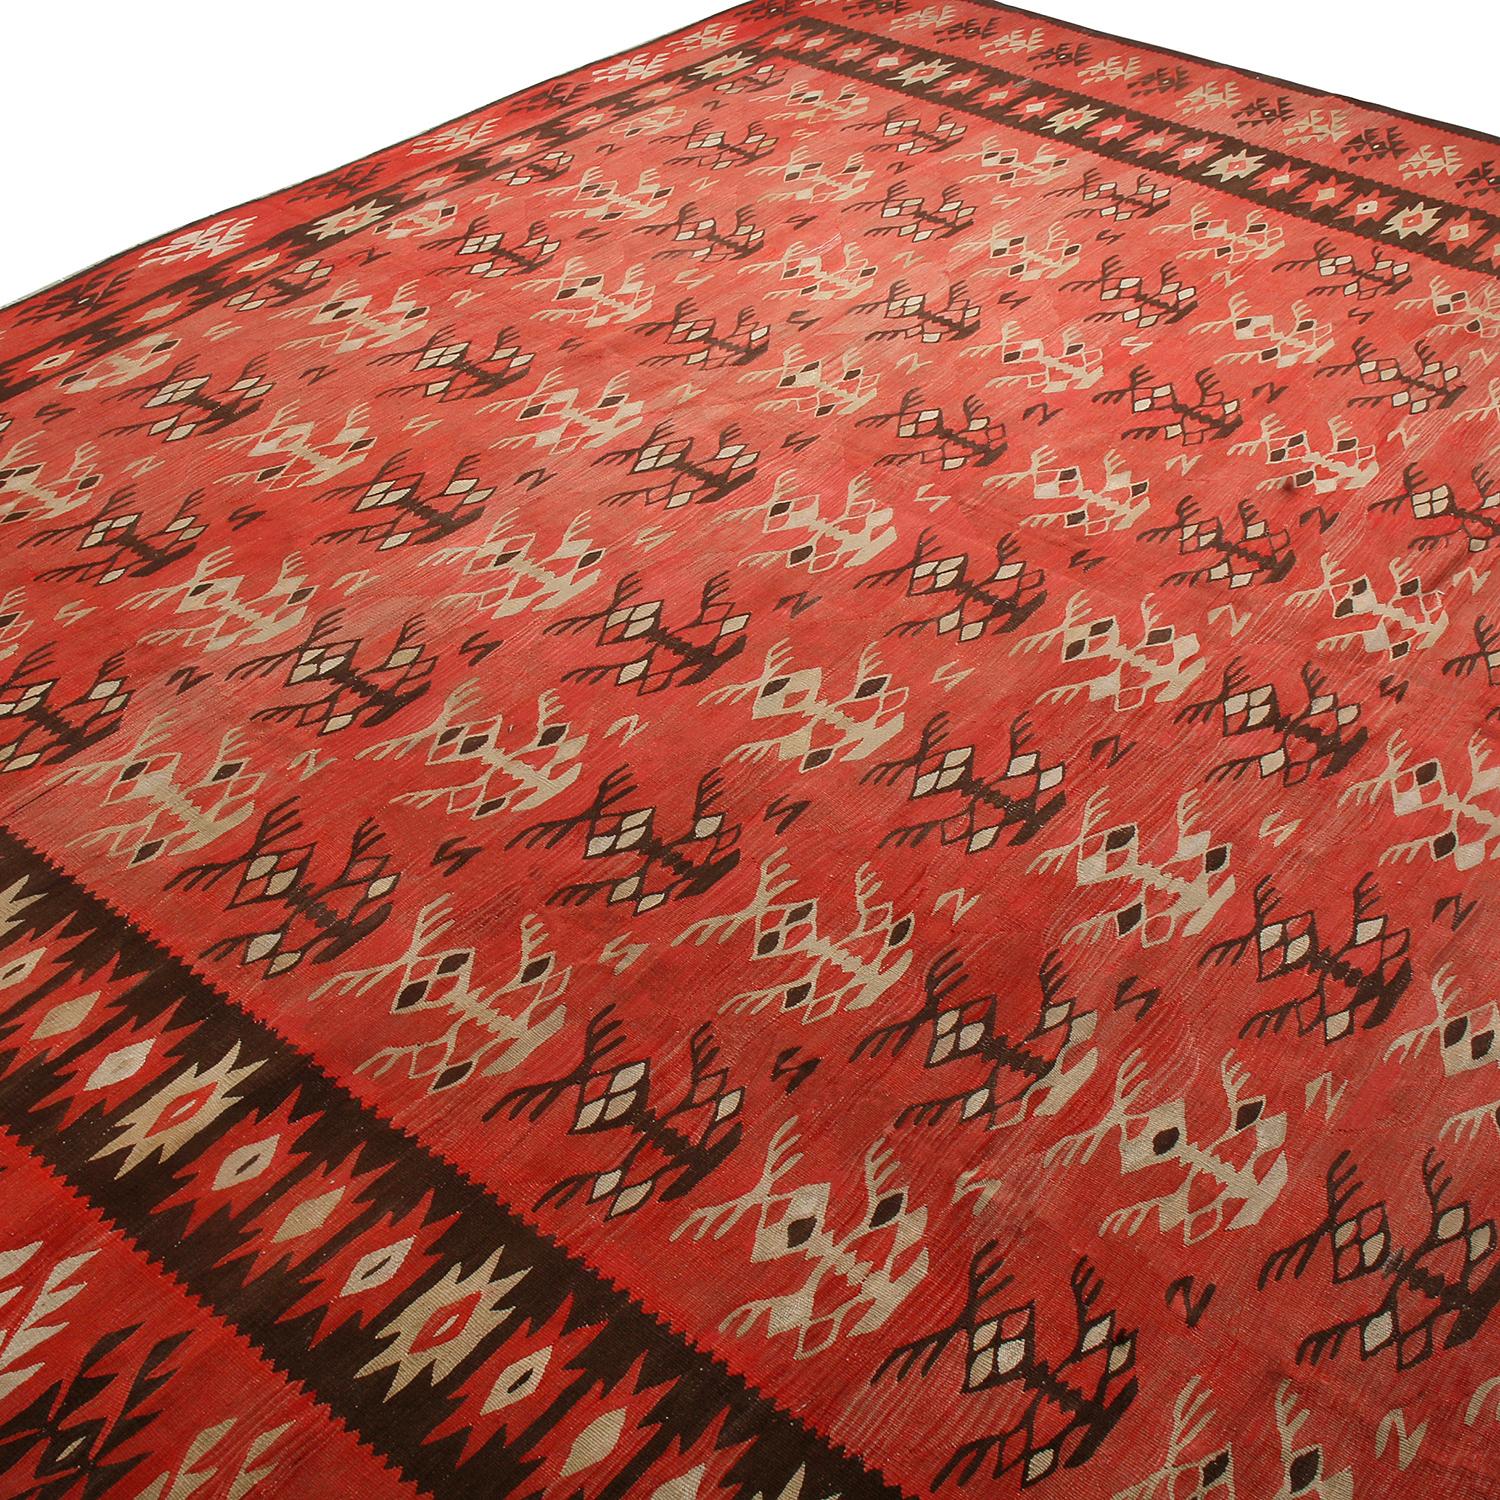 Handwoven in Turkey originating between 1950-1960, this vintage mid-century wool Kilim hails from the Pirot, also known as Sarkoy (Sarköy). The Classic salmon-red colorway plays well off this unique variation of the black border and beige-brown